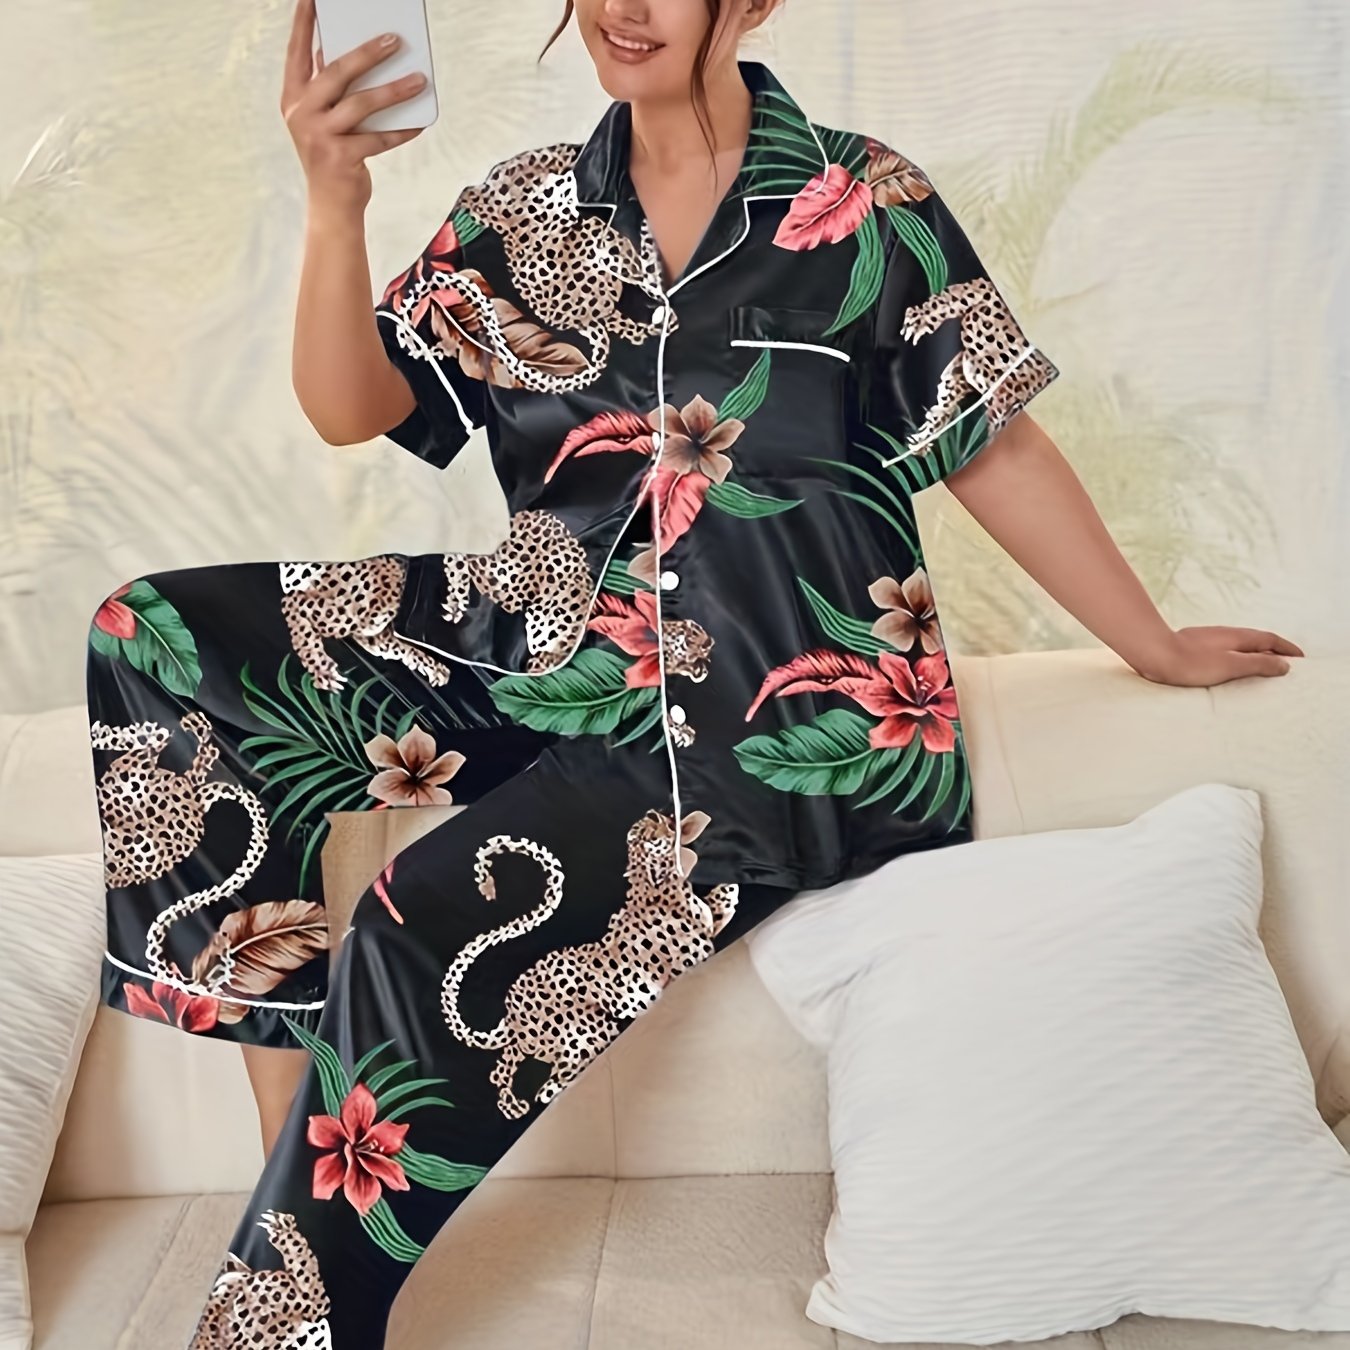 Look & Feel Fabulous in this Plus Size Casual Pajama Set - Women's Satin Leopard Print Tee & Smooth Pants 2pcs Set Panther